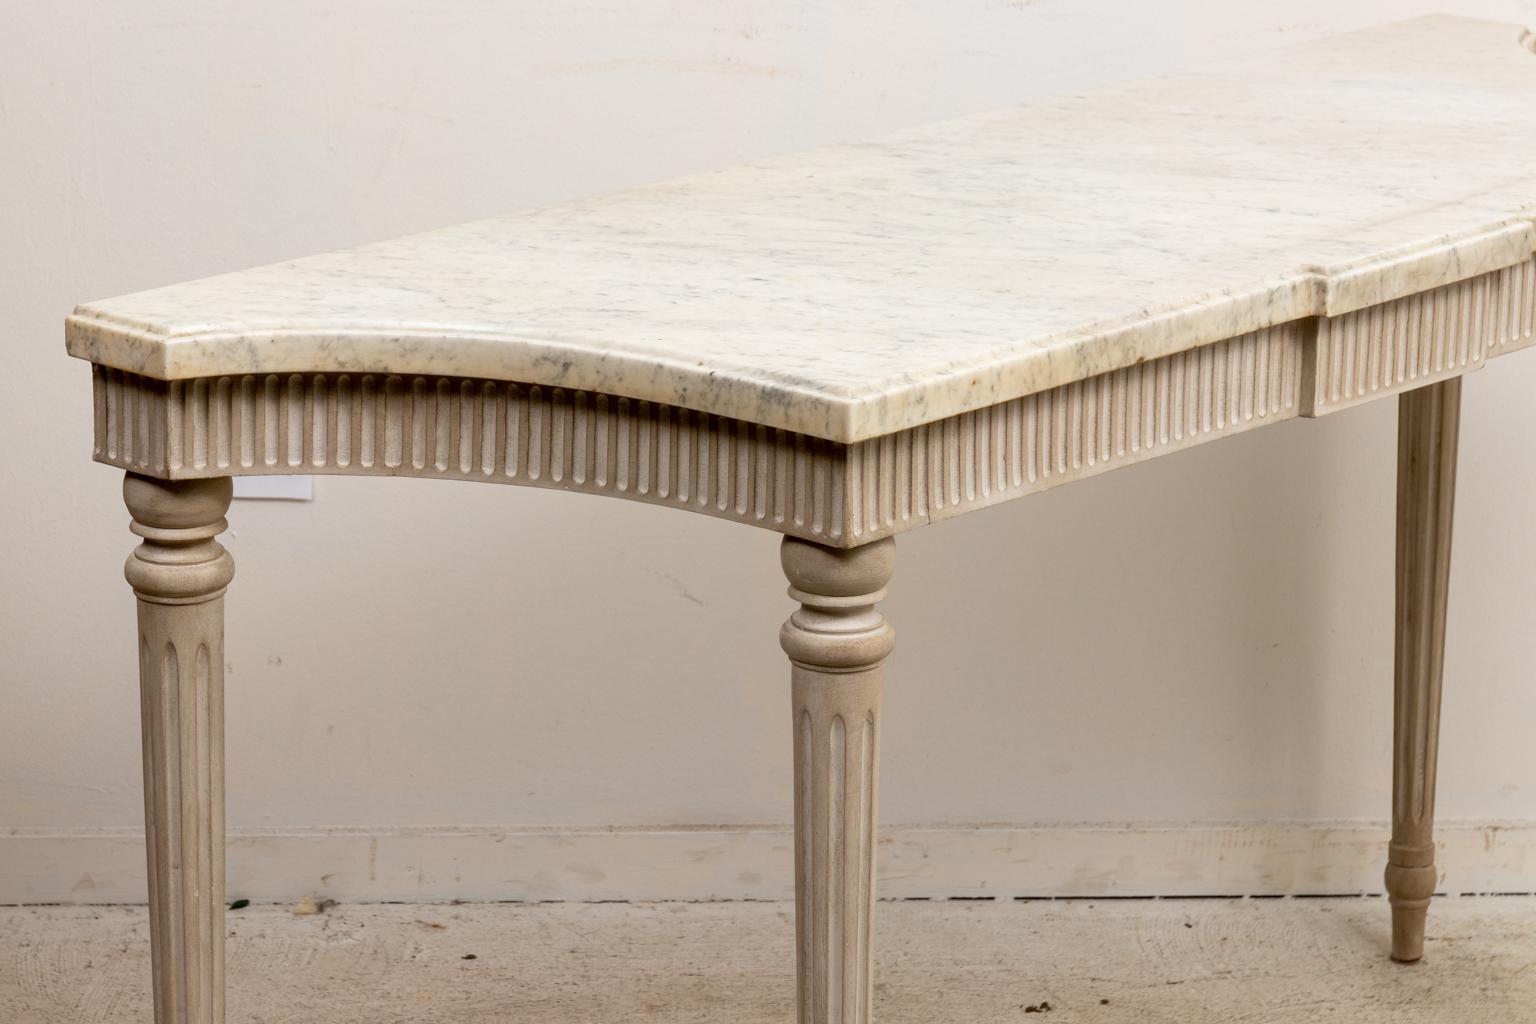 Circa 20th century grisaille painted Neoclassical style console table with fluted apron under turned, tapered, and fluted legs . The piece also features a grey and white 1.50 Inch thick marble top. Made in England. Please note of wear consistent